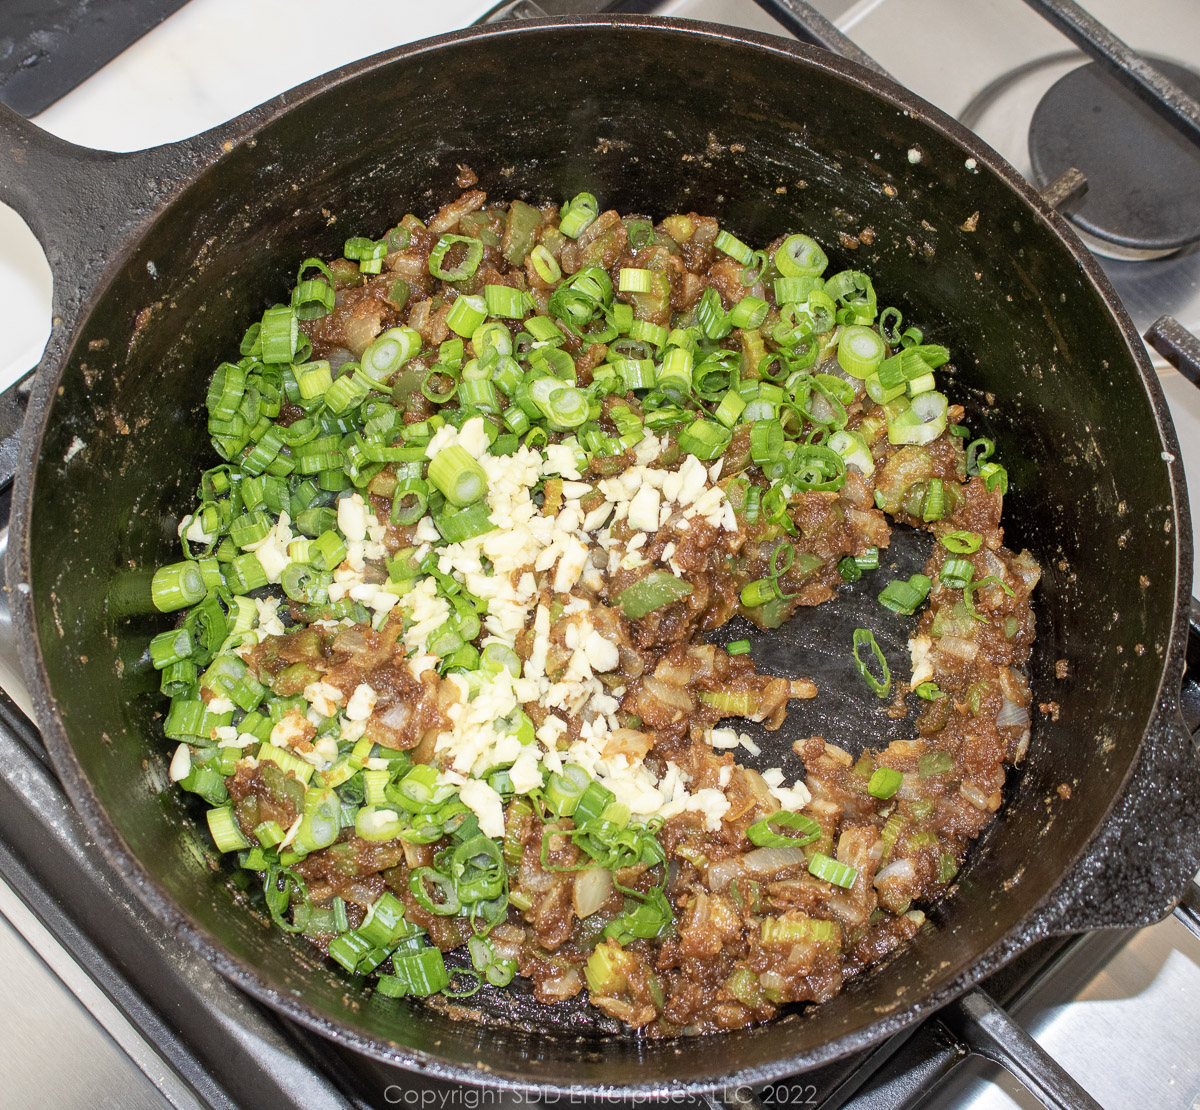 chopped garlic and green onions added to a roux in a dutch oven